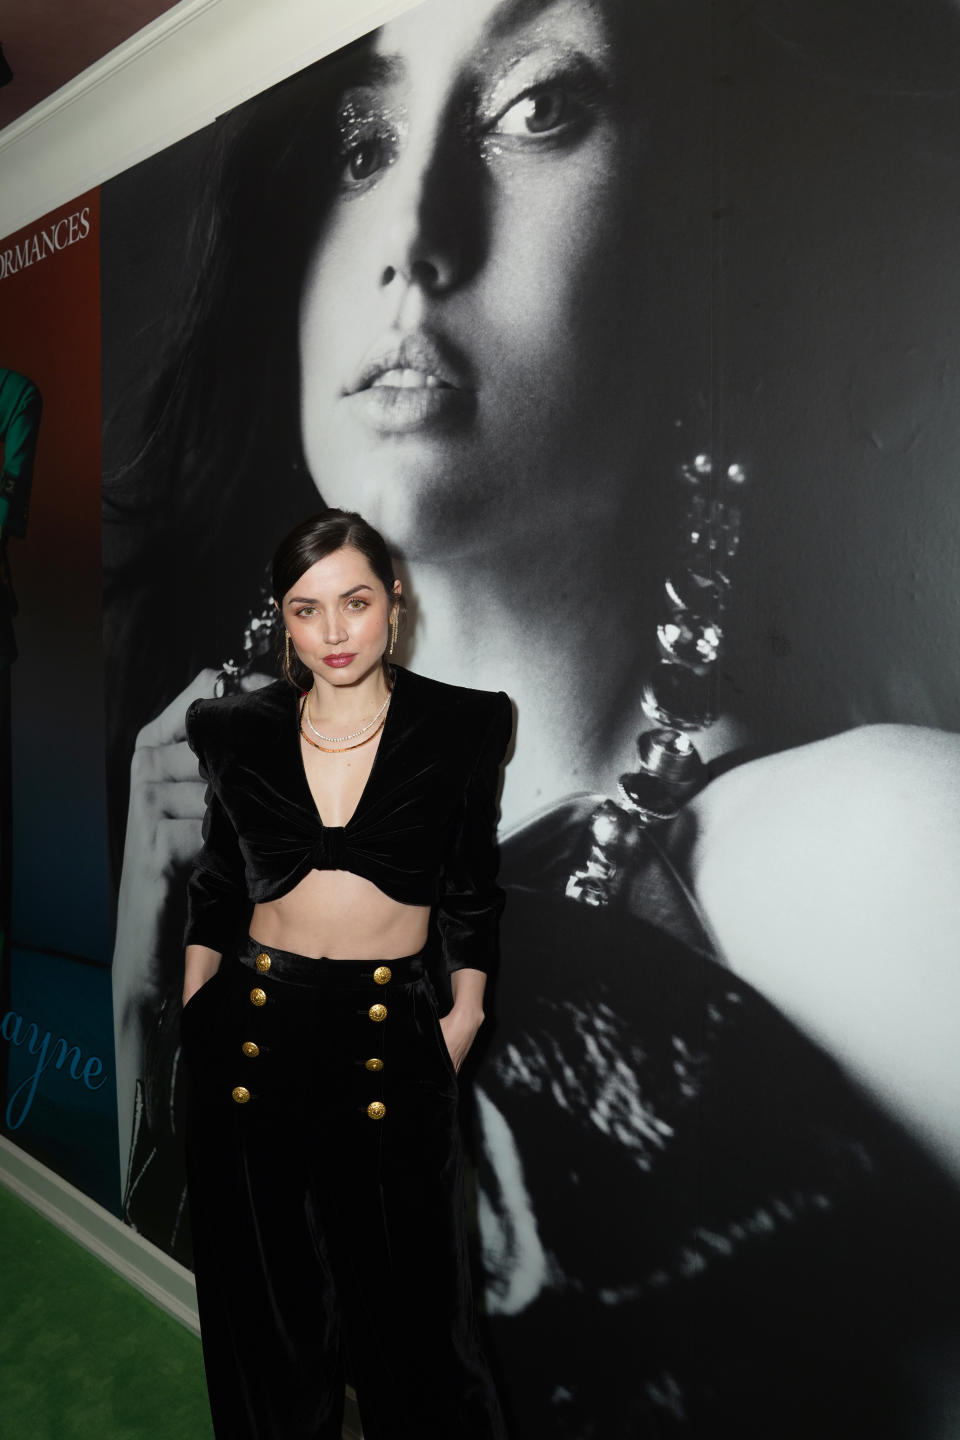 LOS ANGELES, CALIFORNIA - FEBRUARY 24: Ana de Armas attends W Magazine's Annual Best Performances Party at Chateau Marmont on February 24, 2023 in Los Angeles, California. (Photo by Presley Ann/Getty Images for W Magazine)